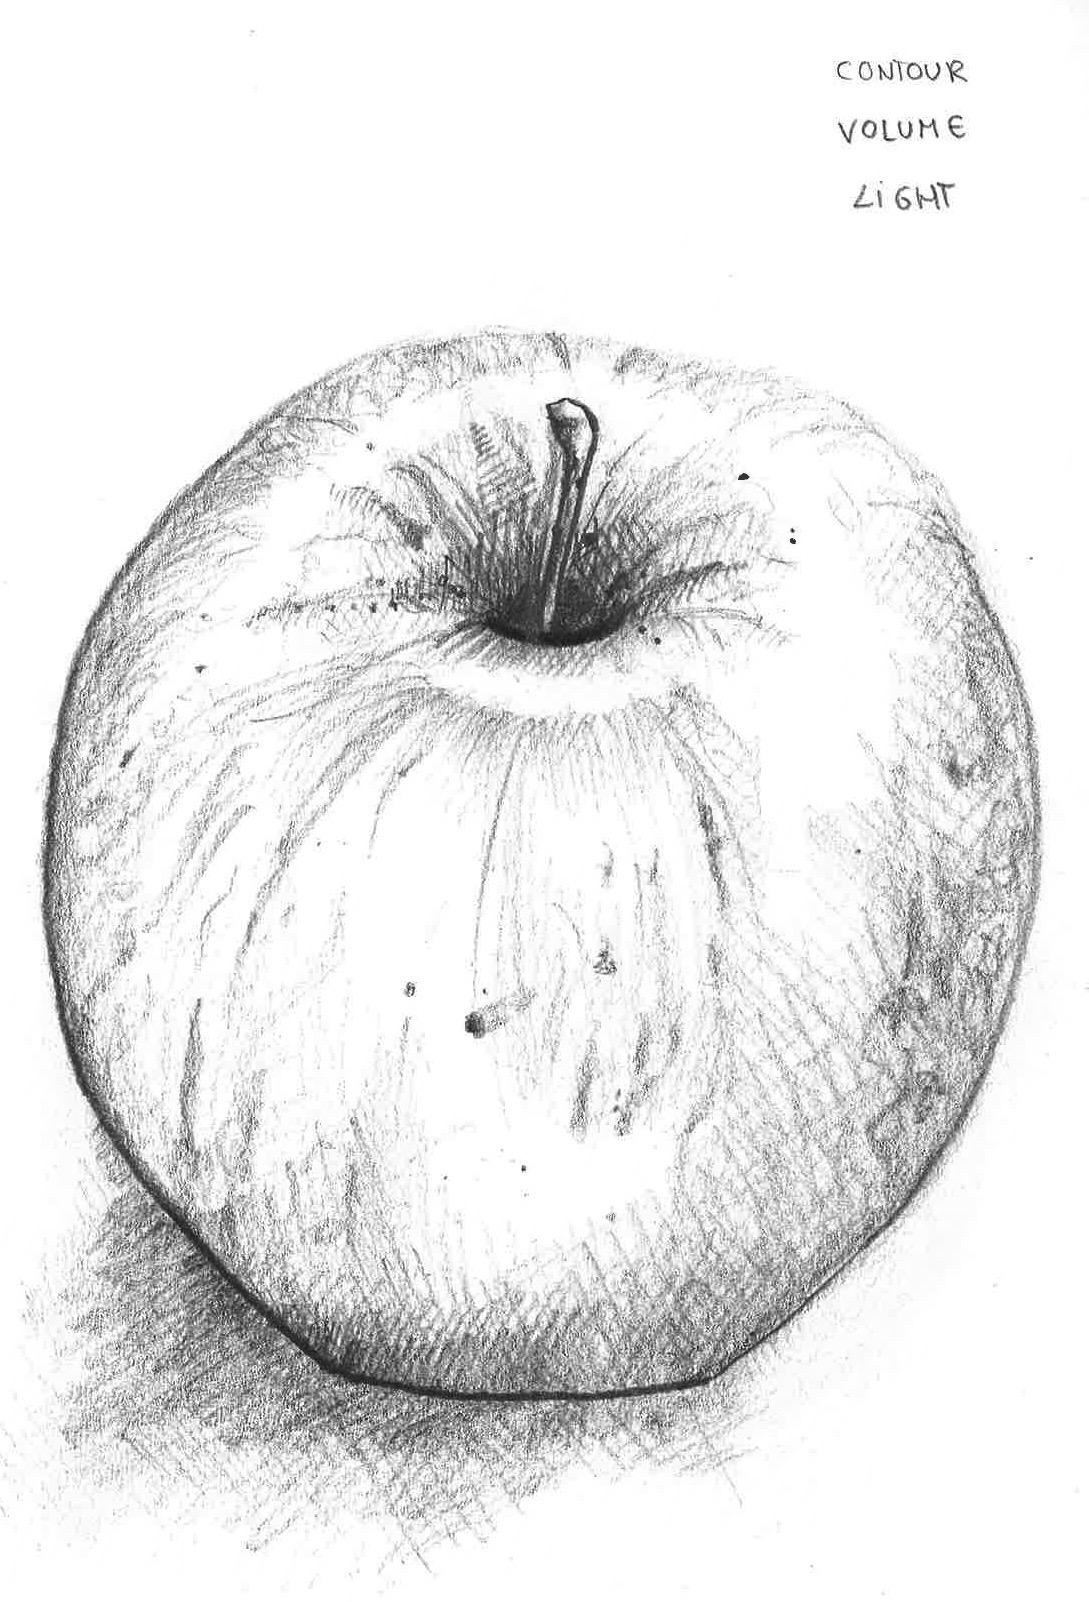 Live drawings from an apple